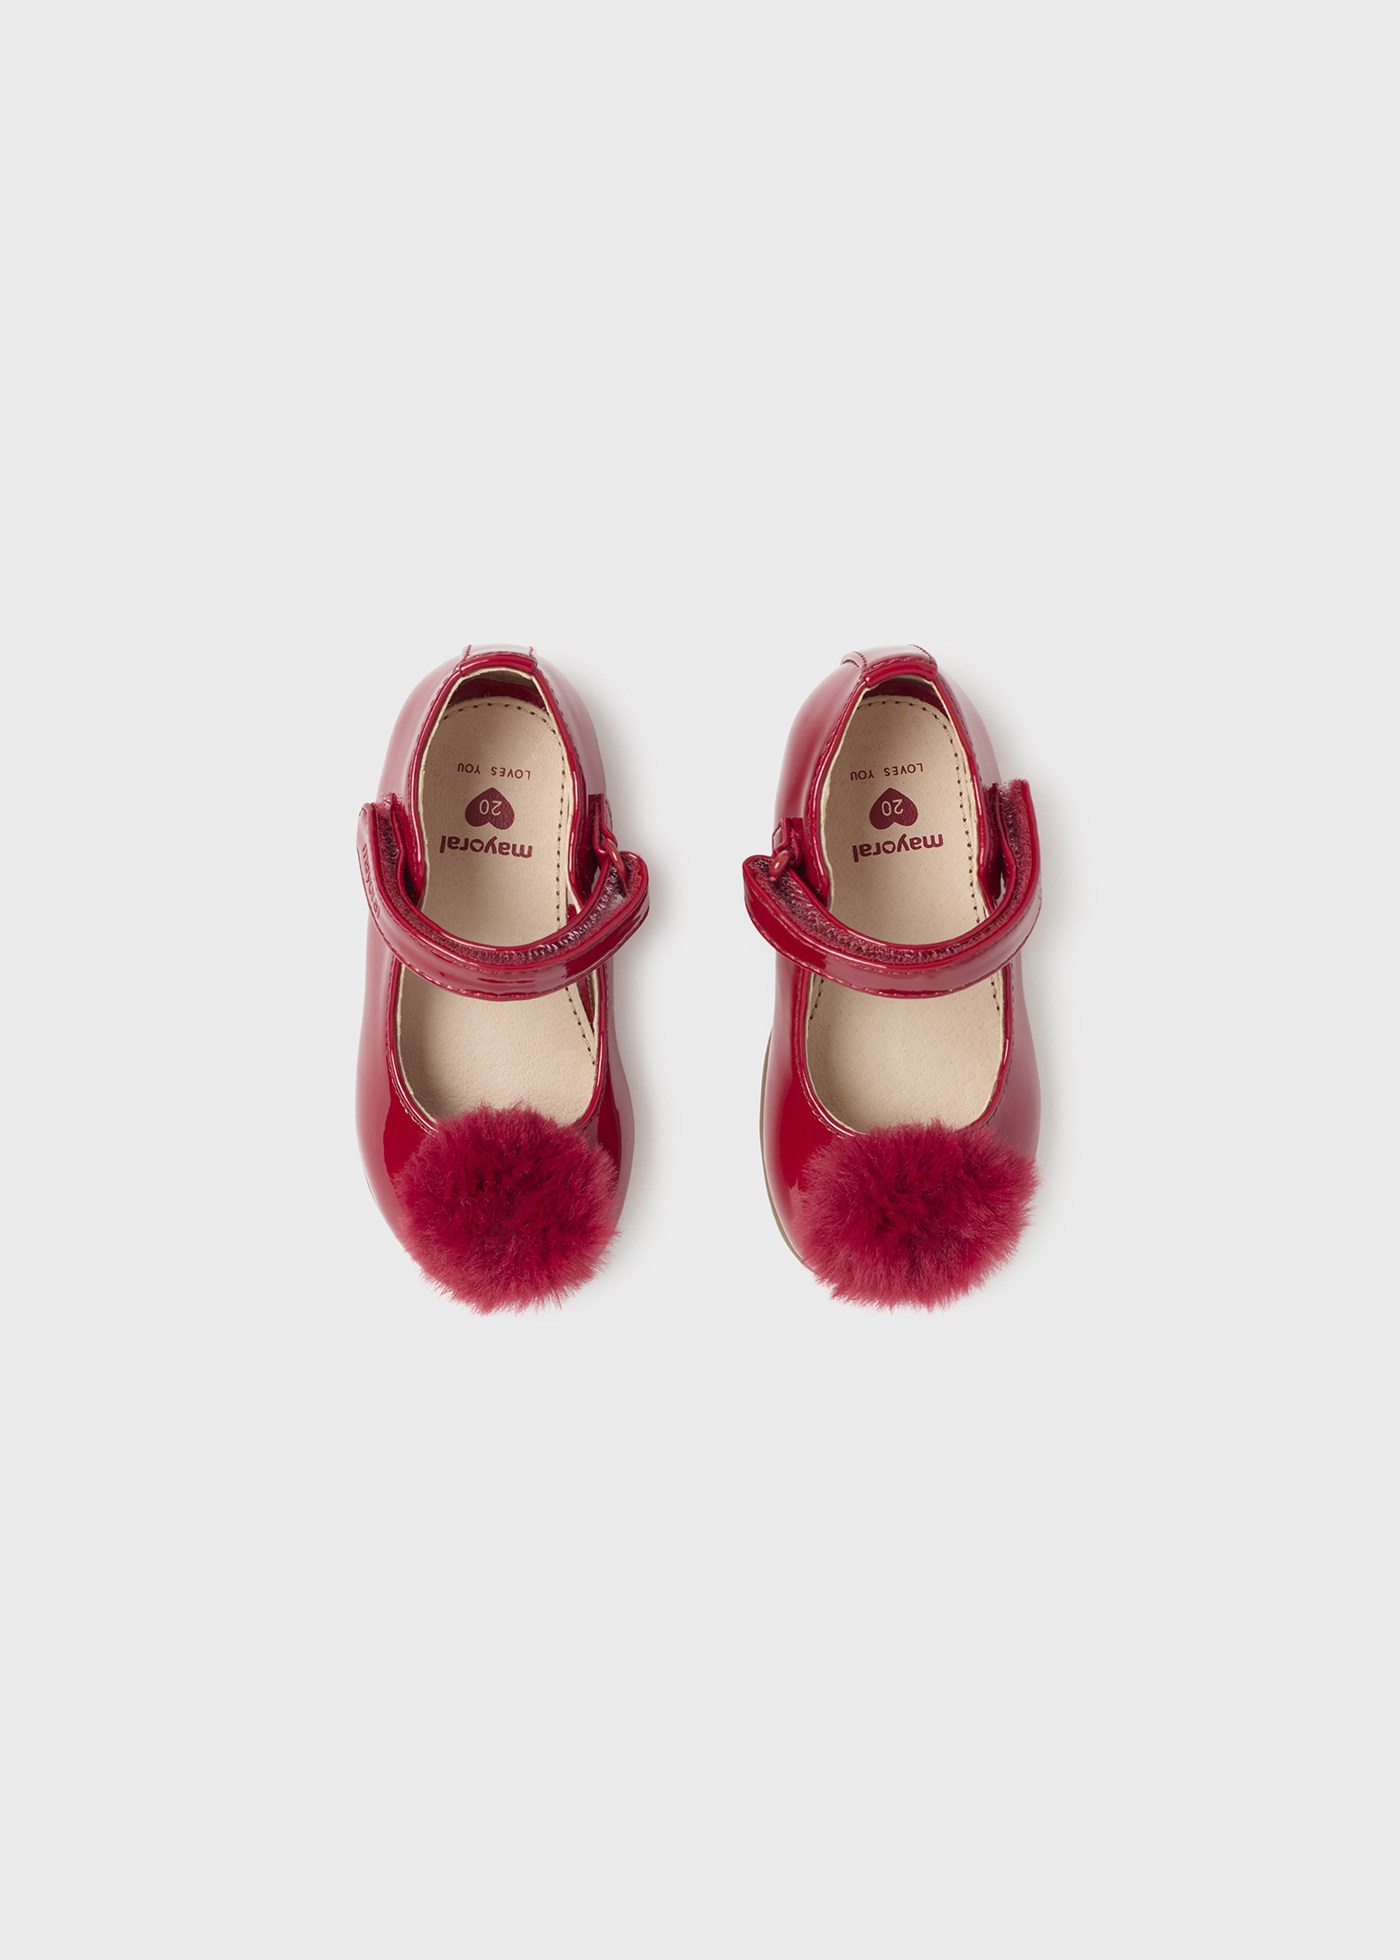 Baby pompom ballet flats sustainable leather